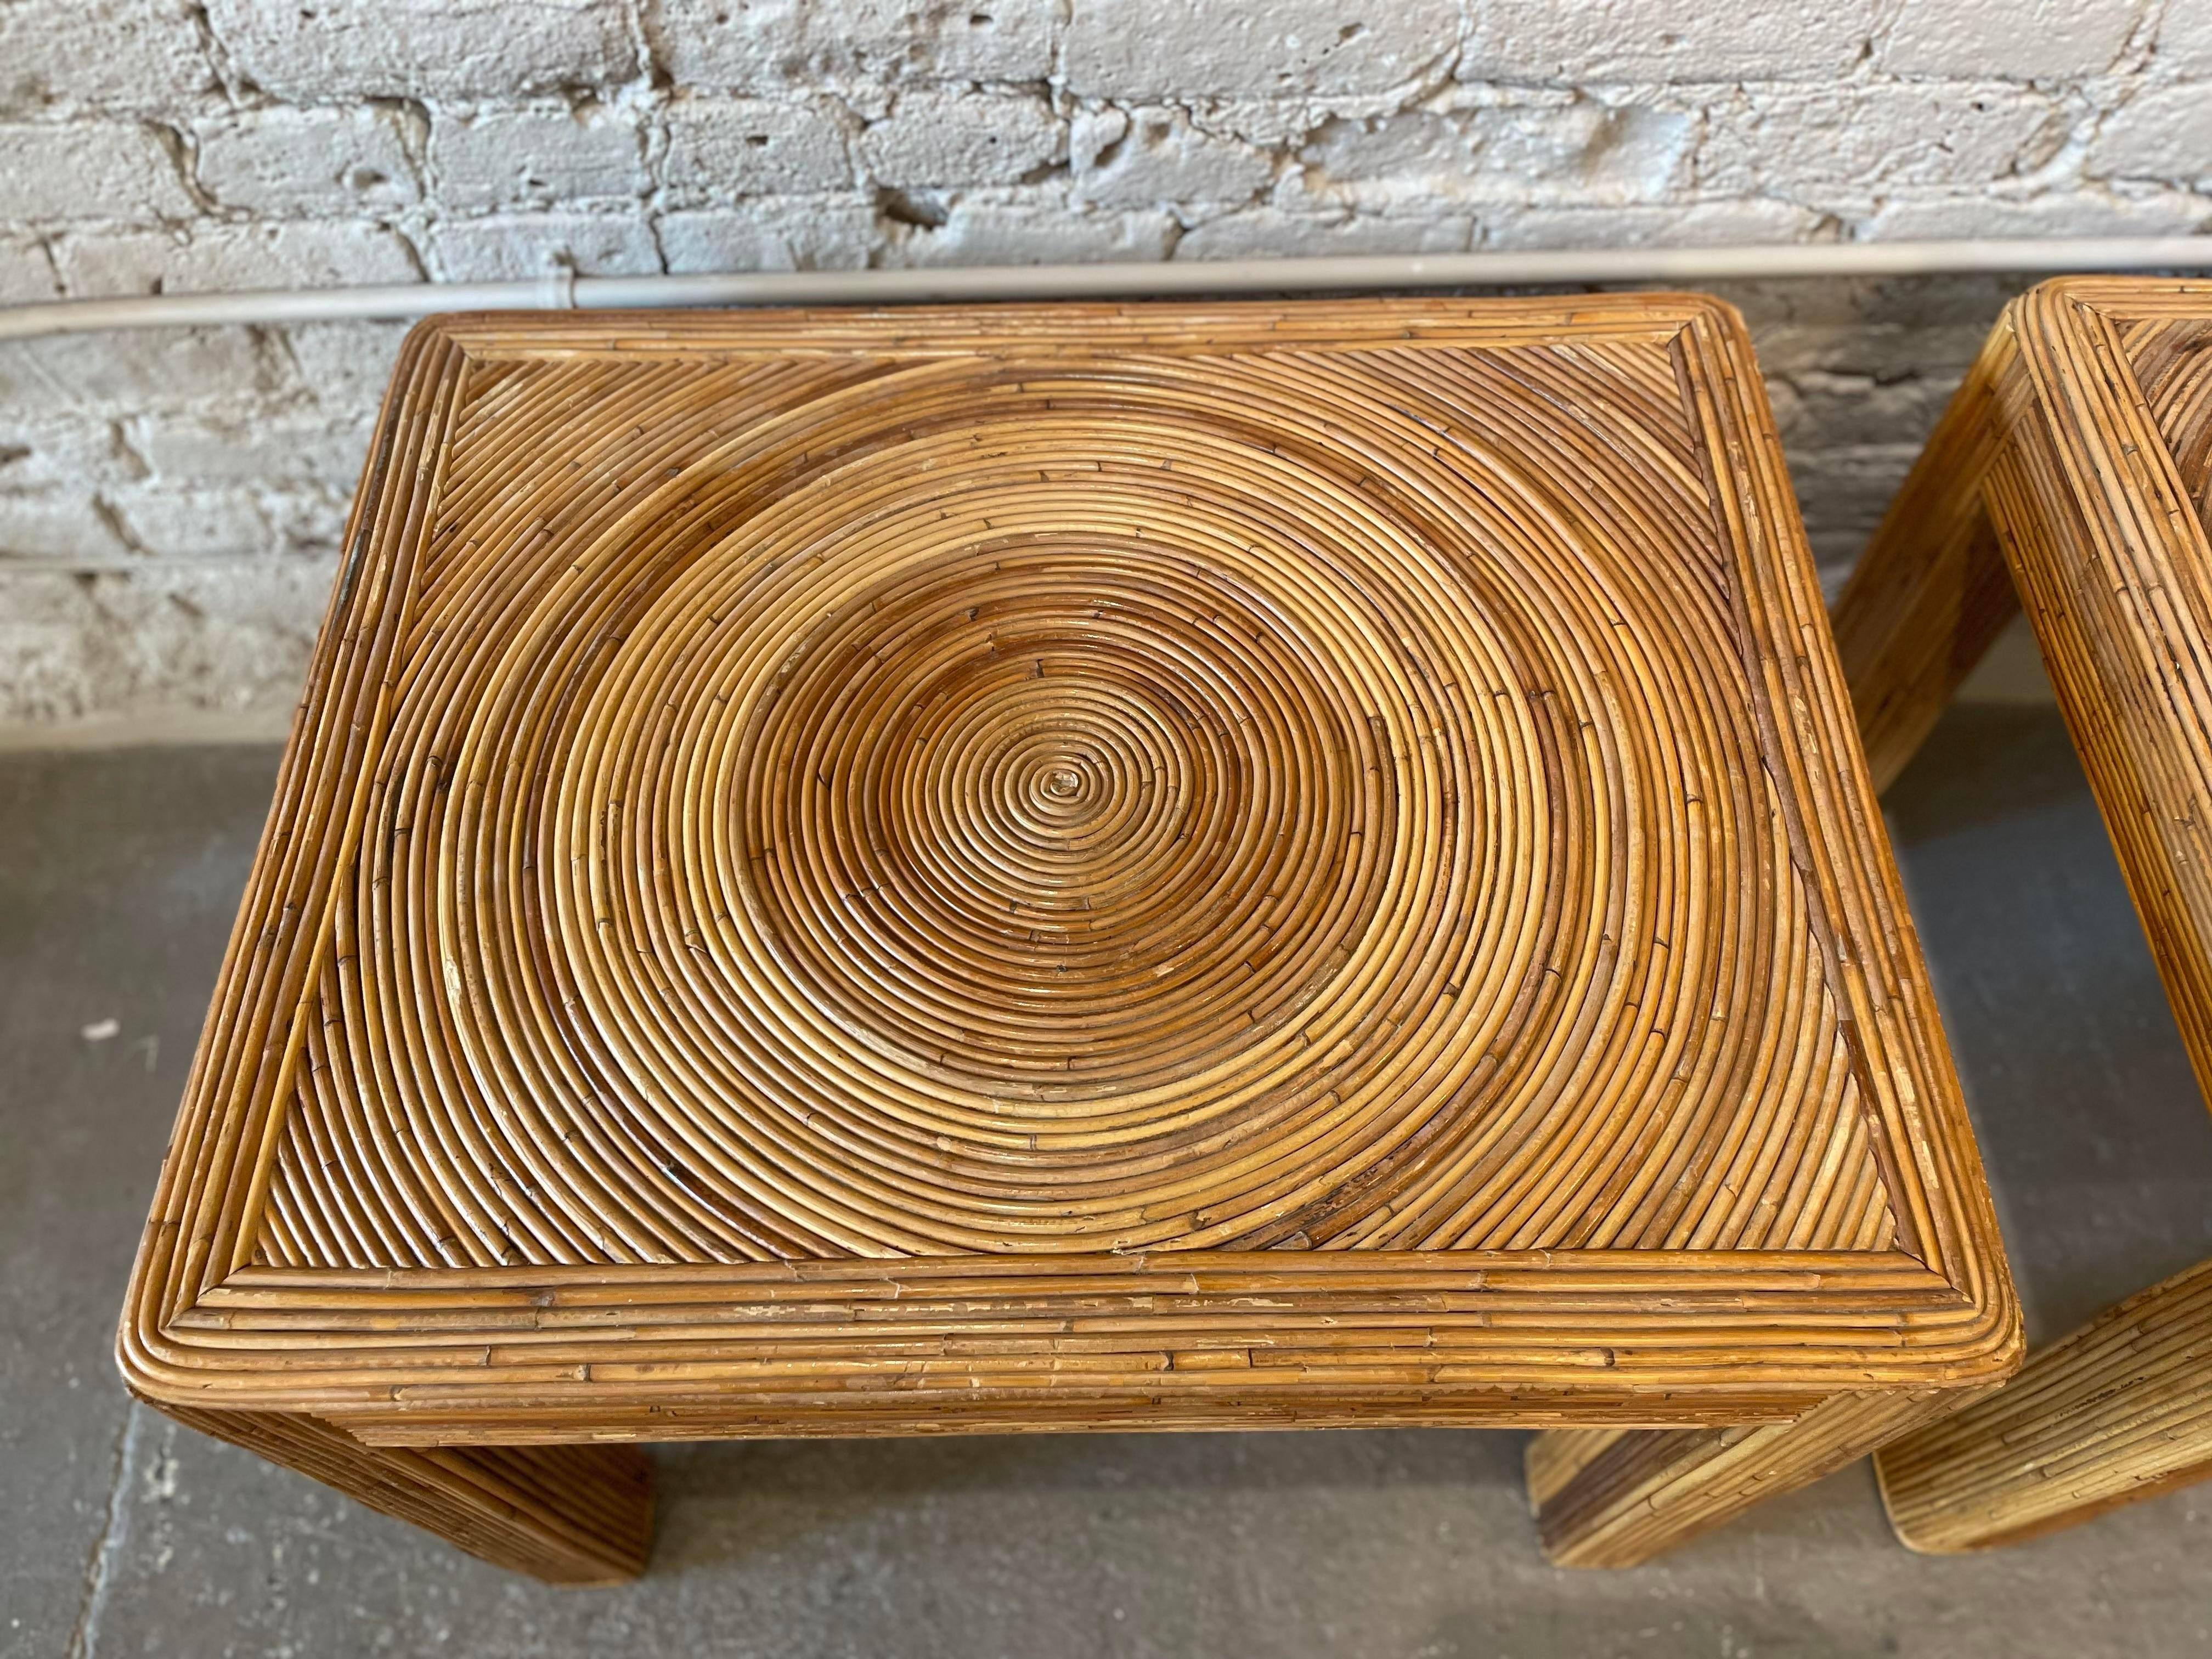 Beautiful earthy side tables in the original finish. Wear consistent with age, not broken or damaged areas.
